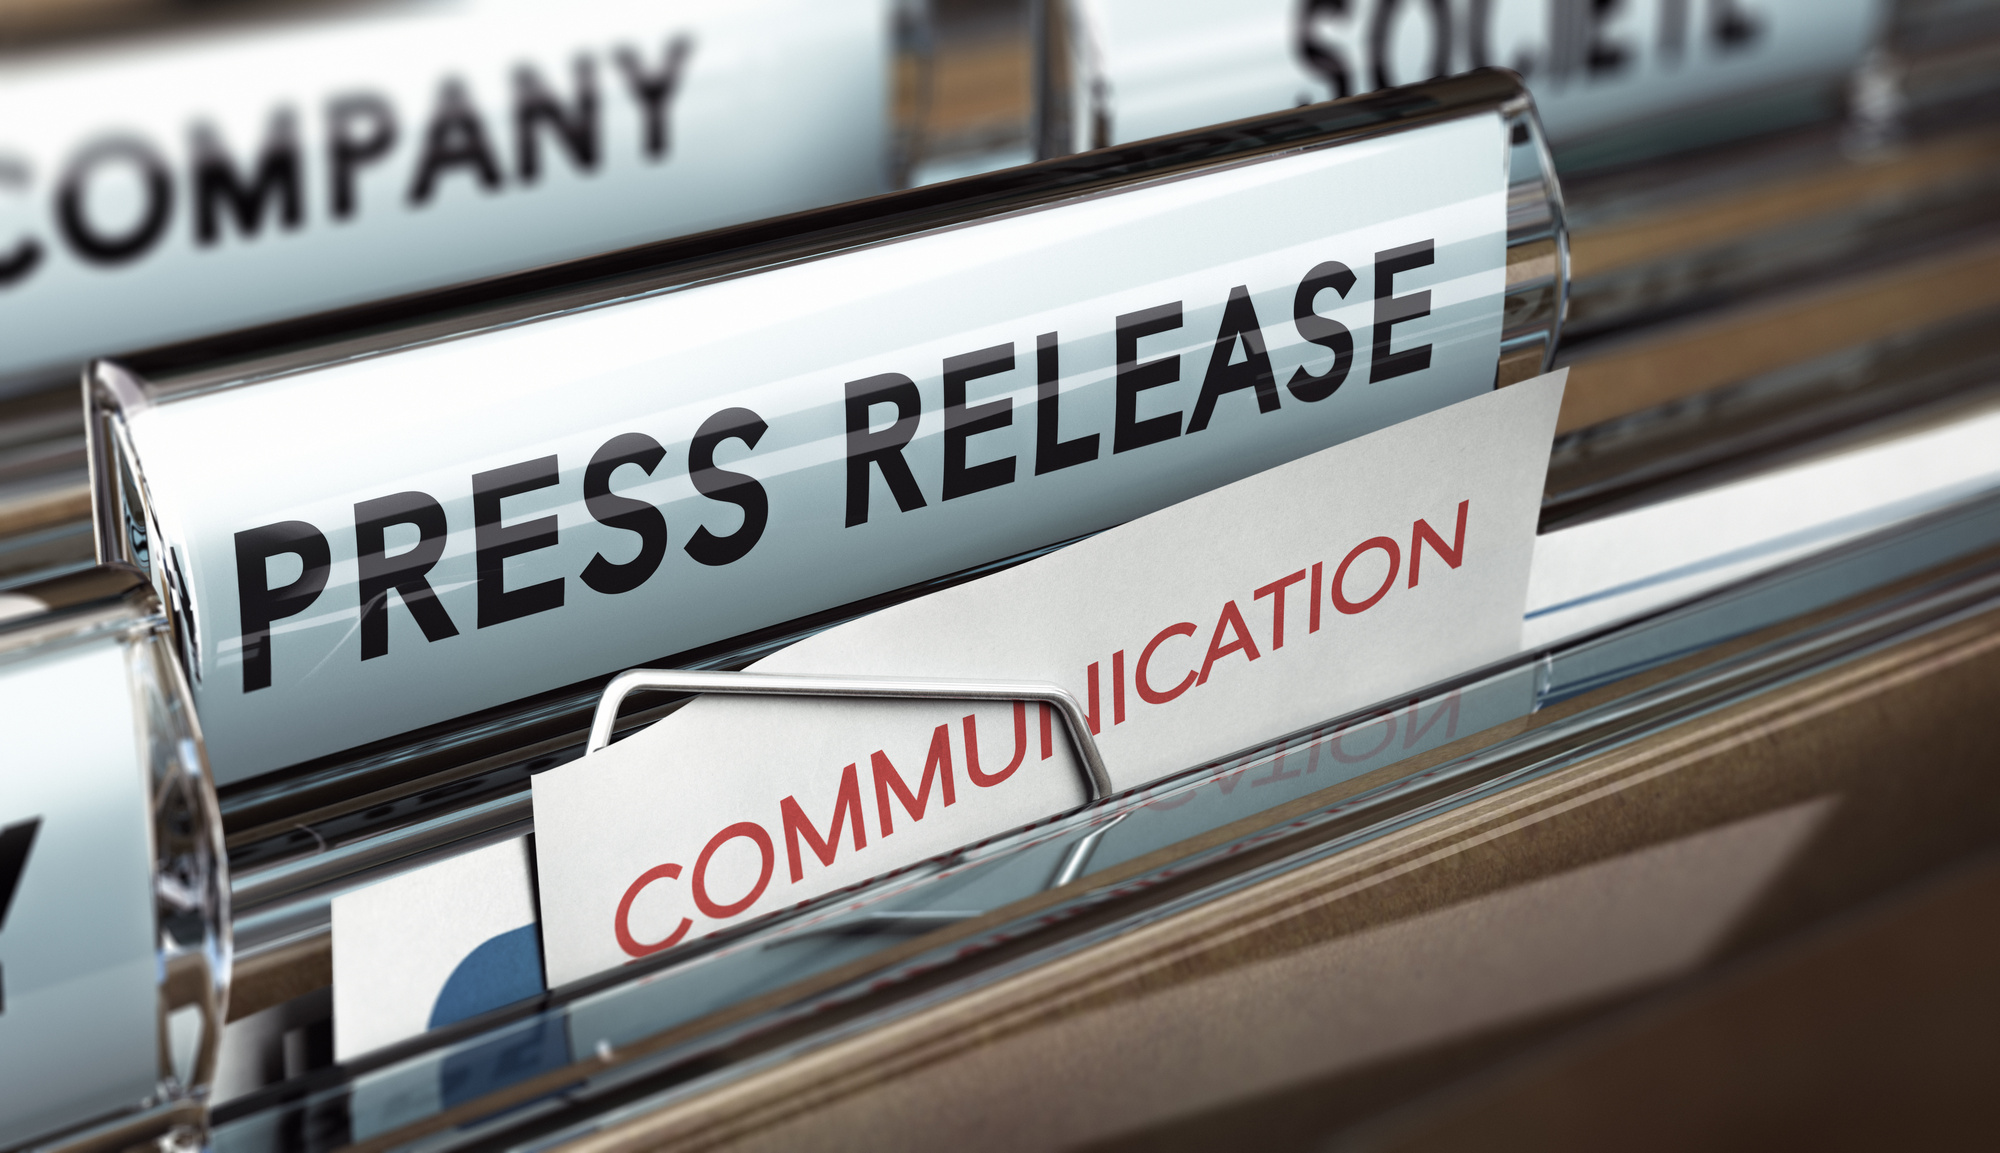 Impress your neighbours with these video press release distribution tips.